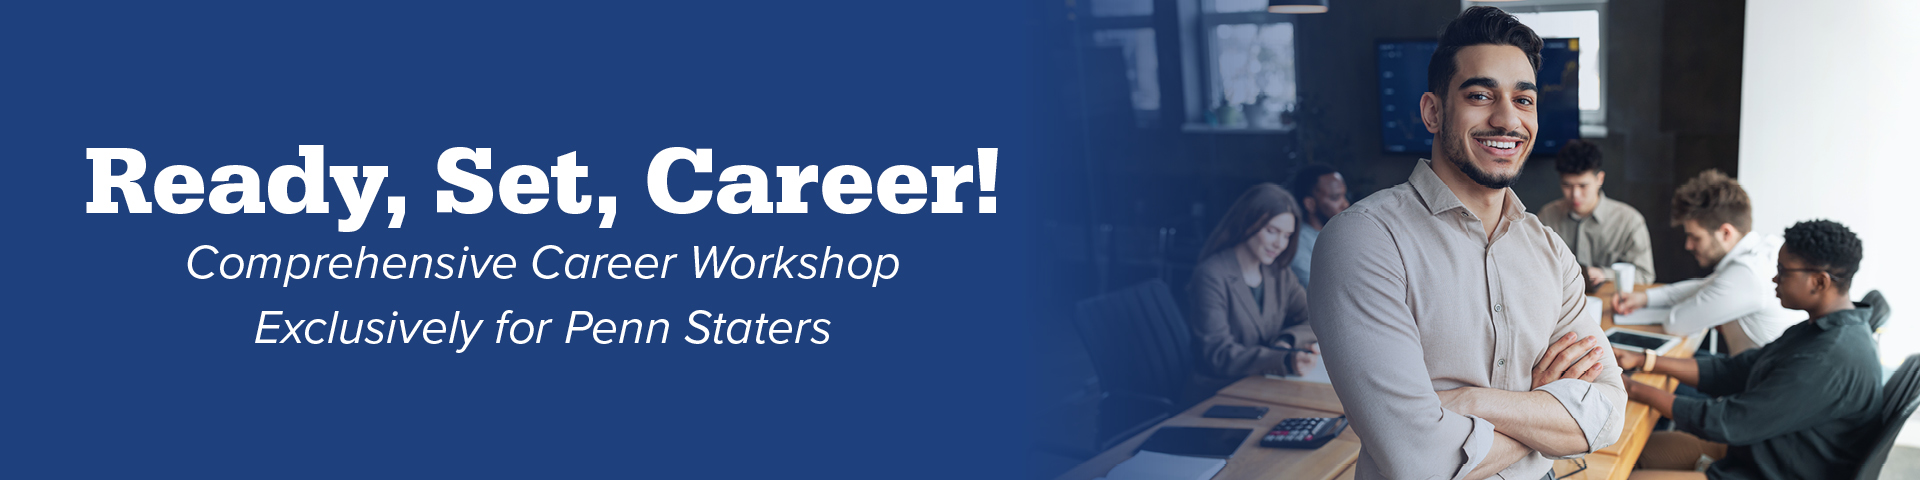 Graphic with text that reads "Ready, Set, Career! Comprehensive Career Workshop Exclusively for Penn Staters" with photo of man in professional dress with crossed arms in a meeting setting